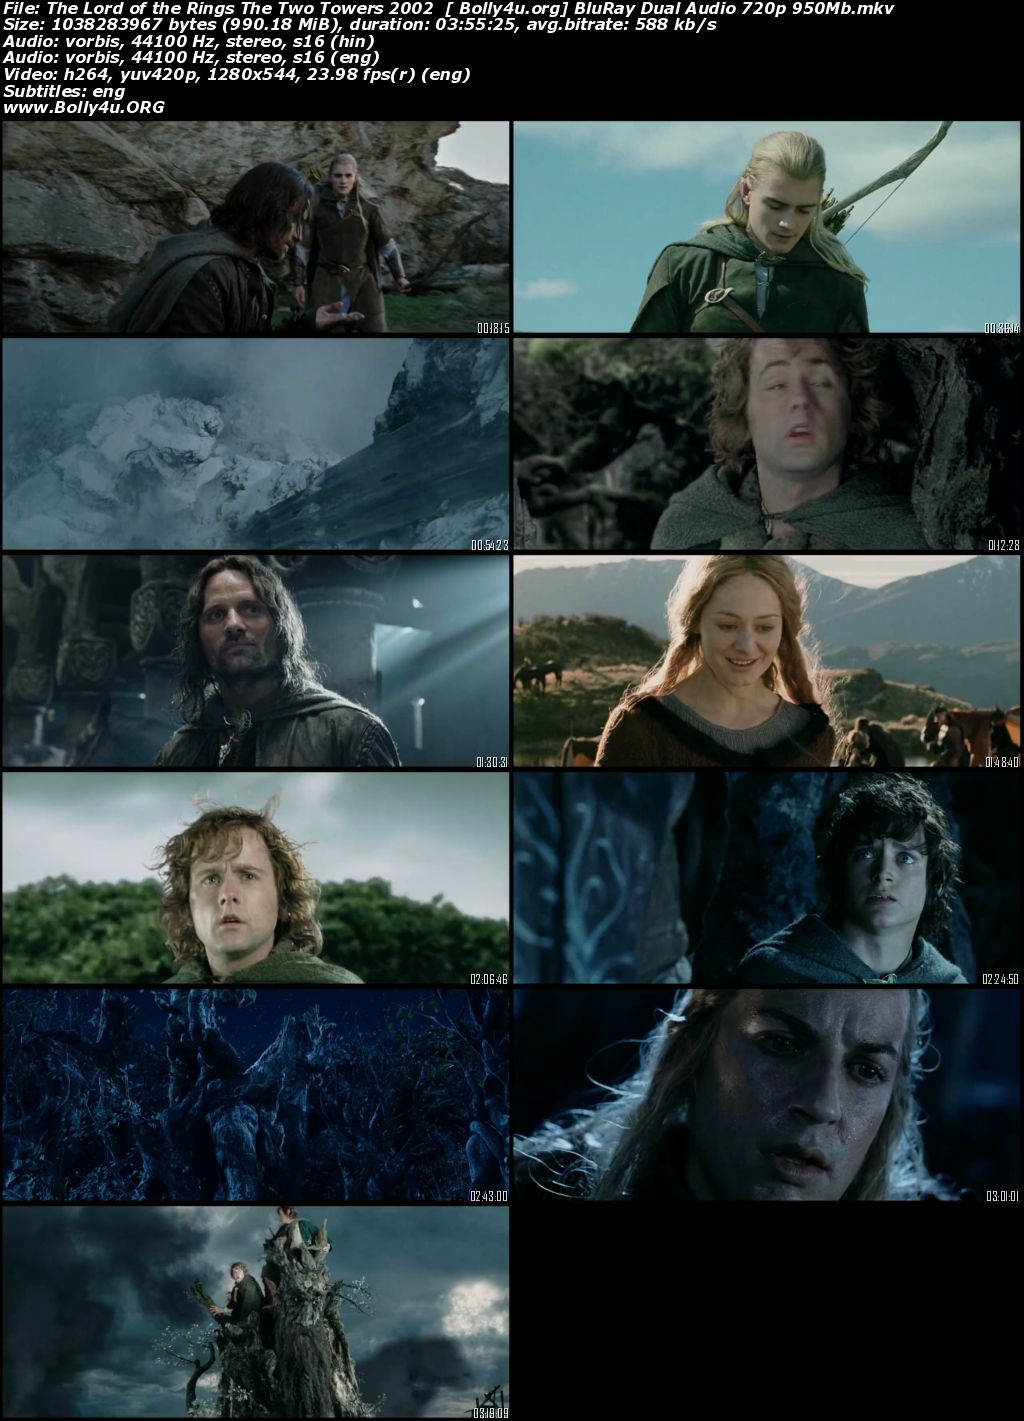 The Lord of the Rings The Two Towers 2002 BRRip 950MB EXTENDED Hindi Dual Audio 720p Download